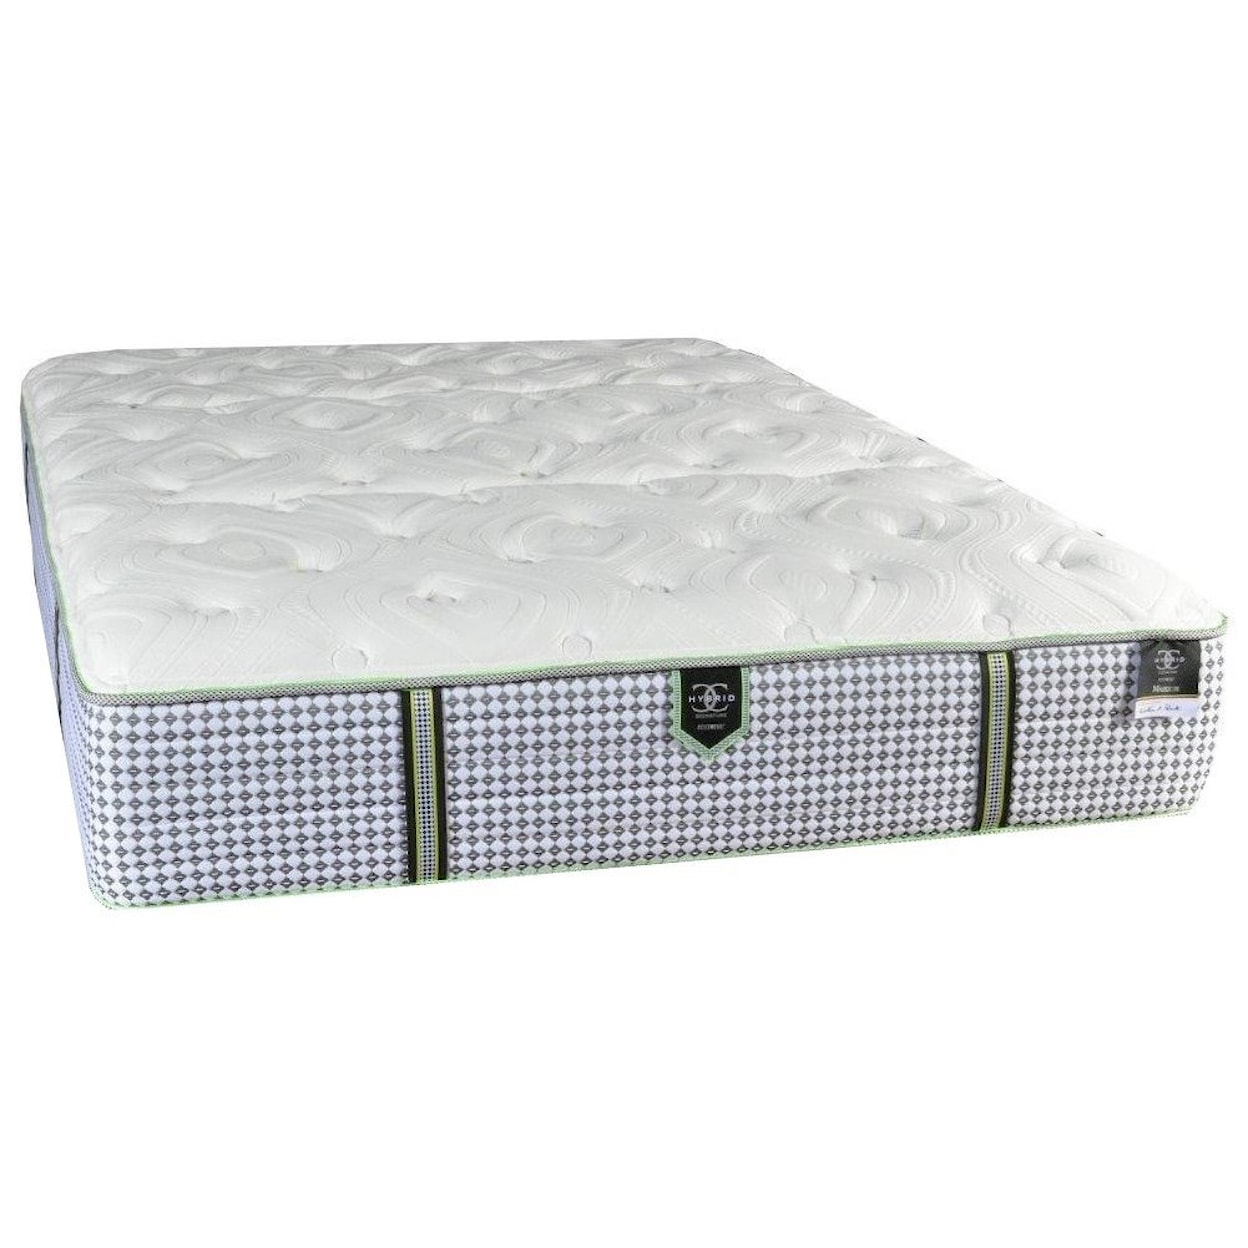 Restonic Marquis Plush King Pocketed Coil Mattress